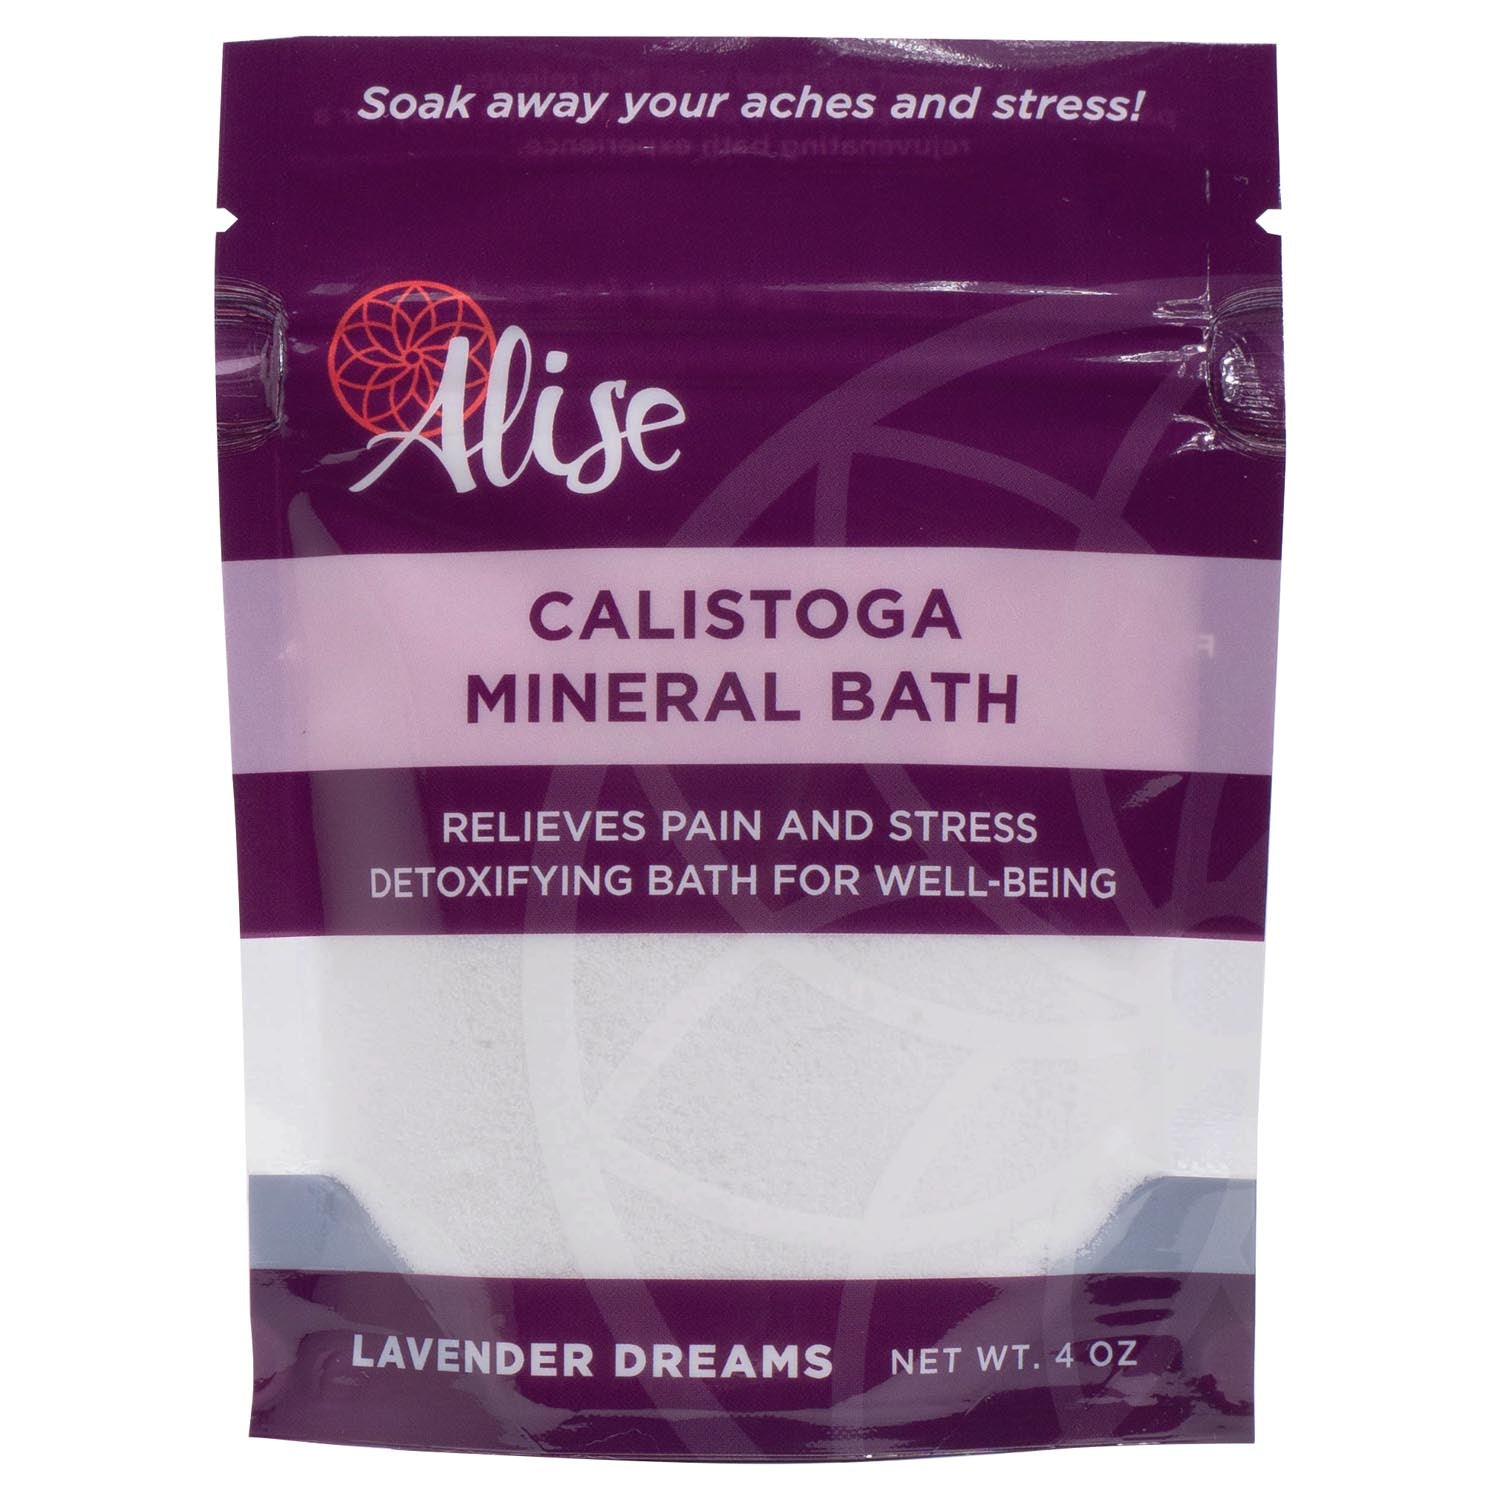 Relieve Pain & Stress with Calistoga Mineral Baths - Alise Body Care